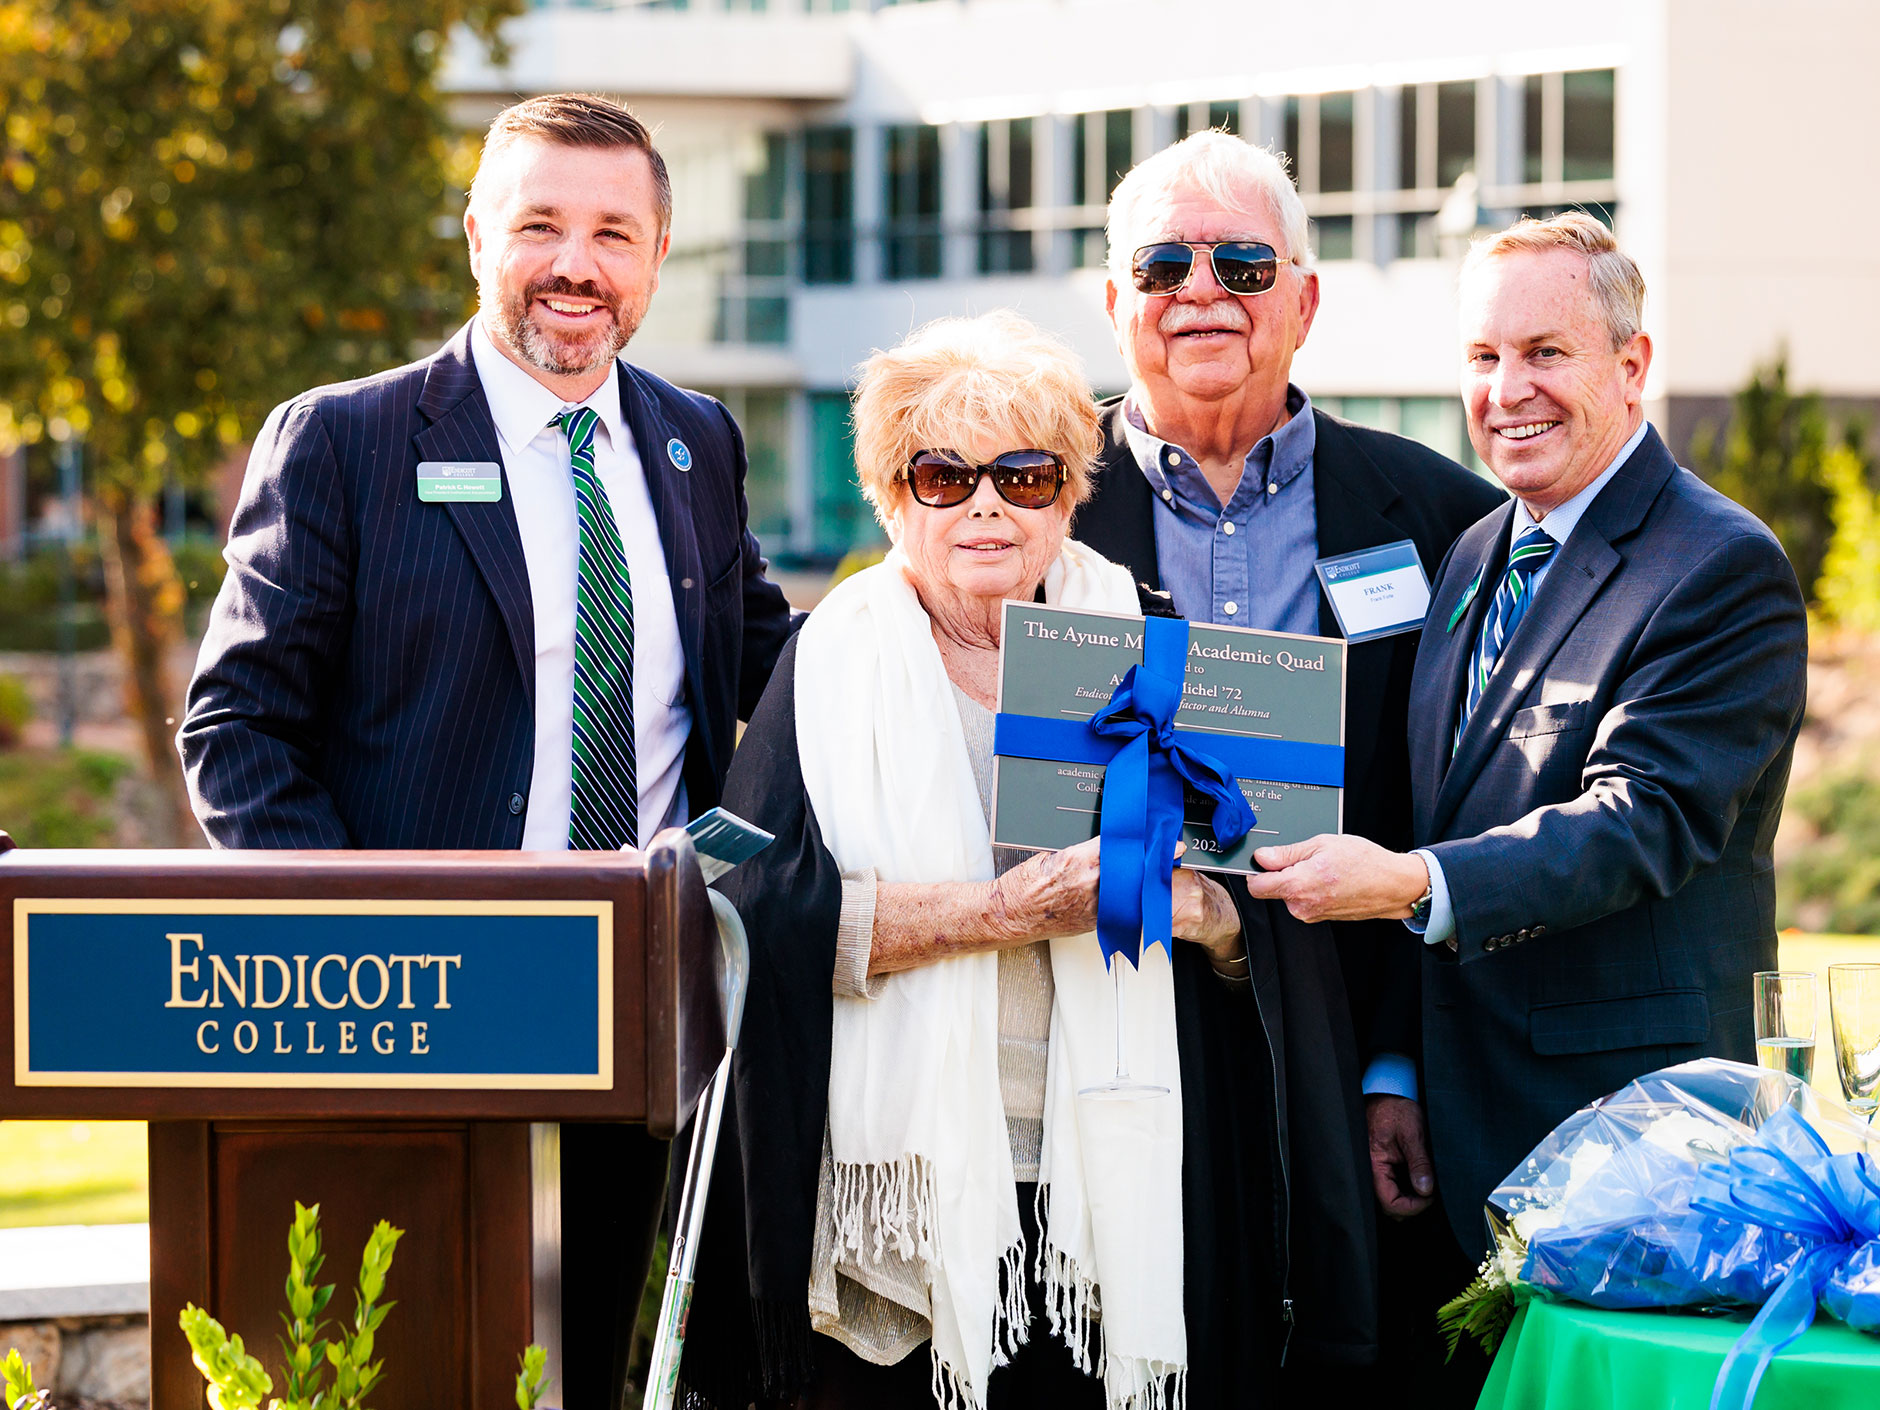 After years as a Trustee and longtime benefactor, Endicott celebrated Ayune Michel ’72 with the dedication of an academic quad in her name.